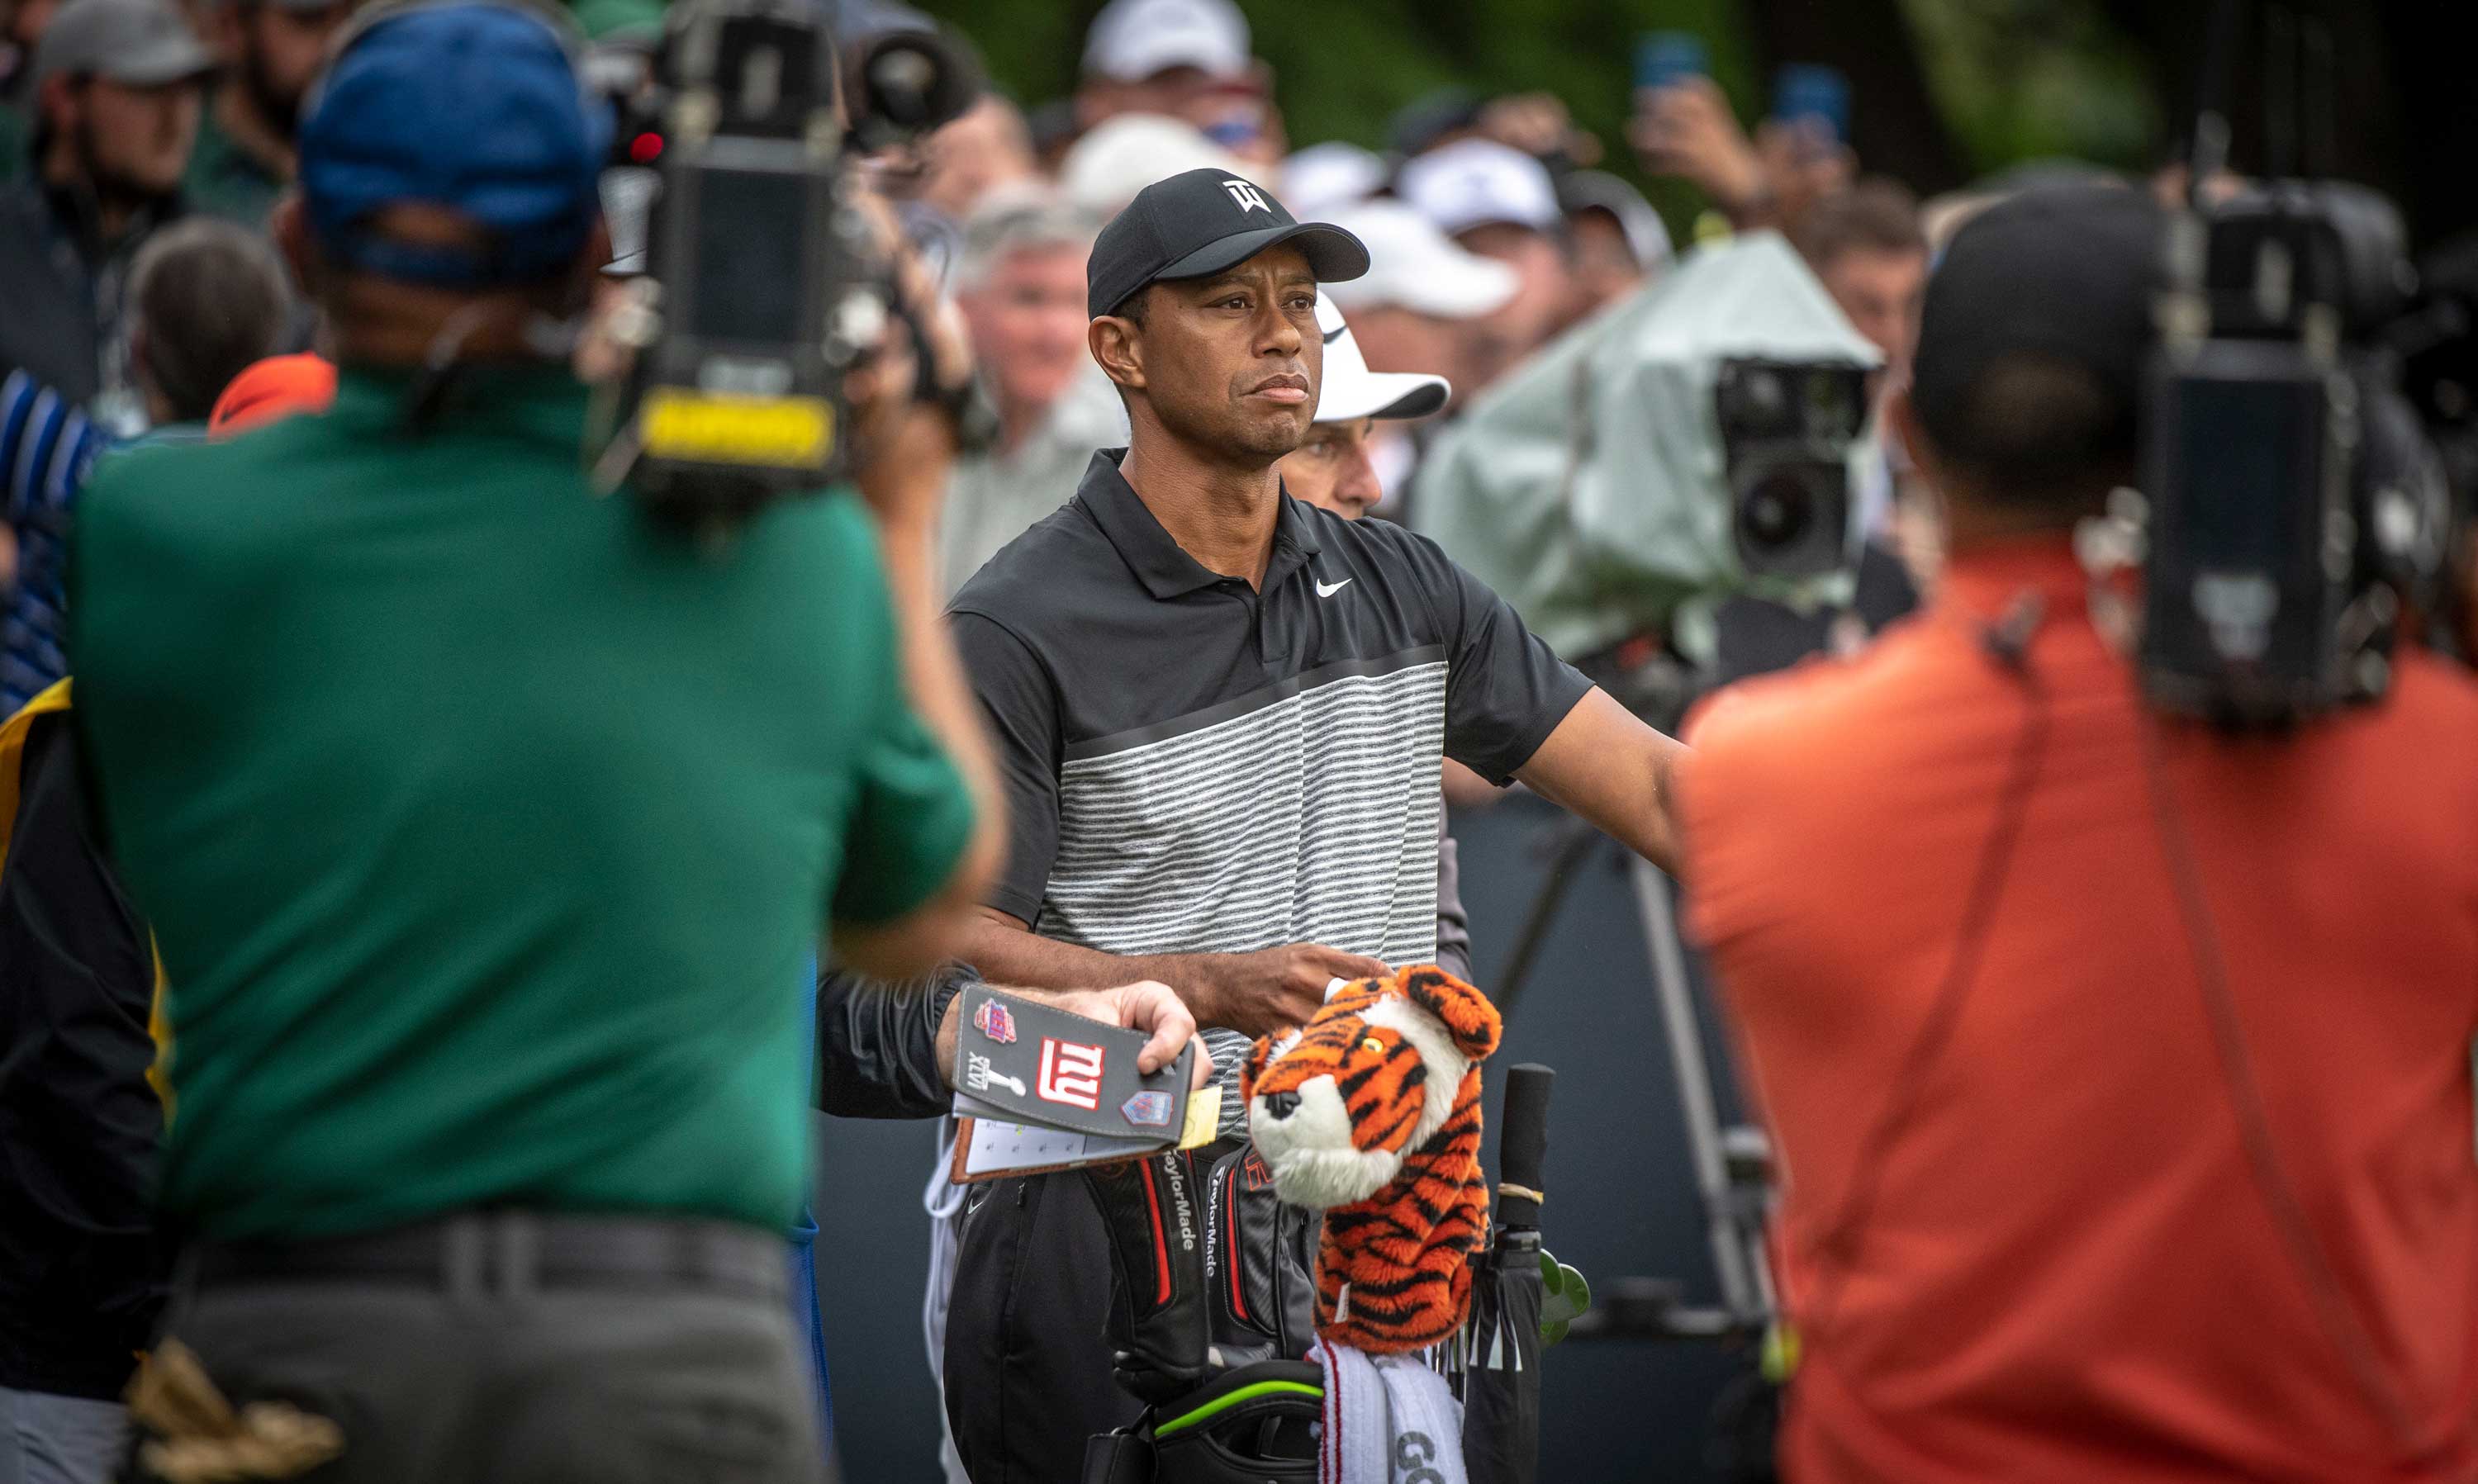 PGA Championship 2022 How to watch the PGA Championship at Southern Hills on television and streaming online Golf News and Tour Information GolfDigest